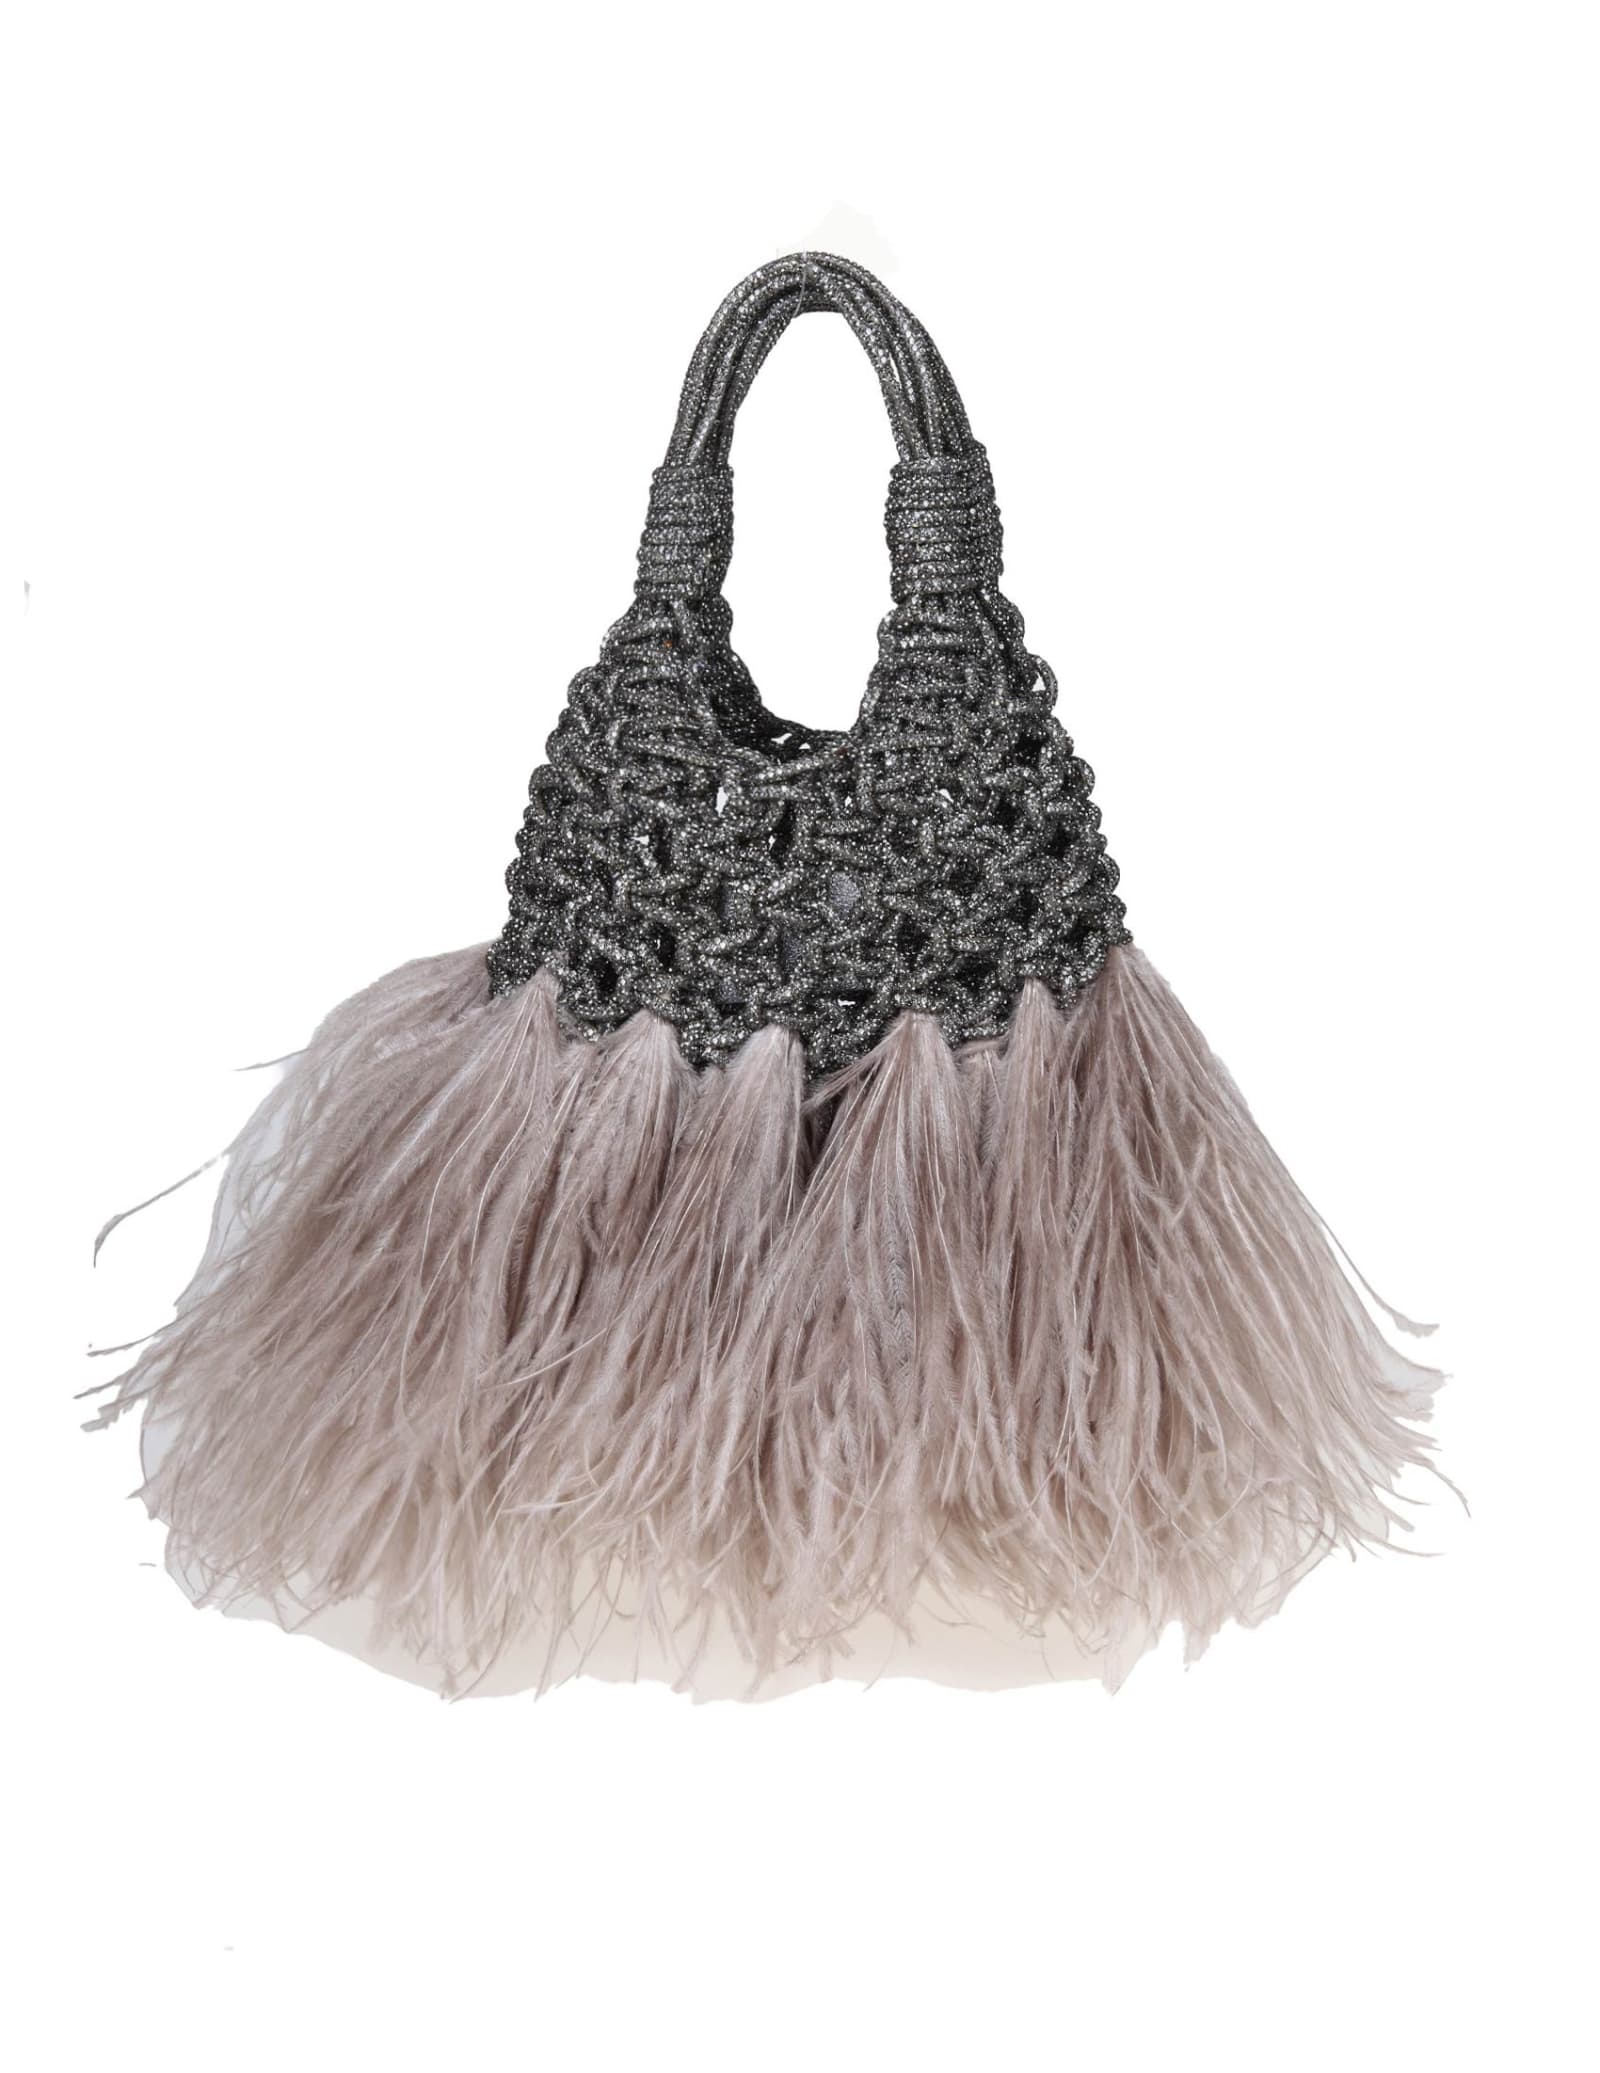 Jewel Bag Woven With Ostrich Feathers